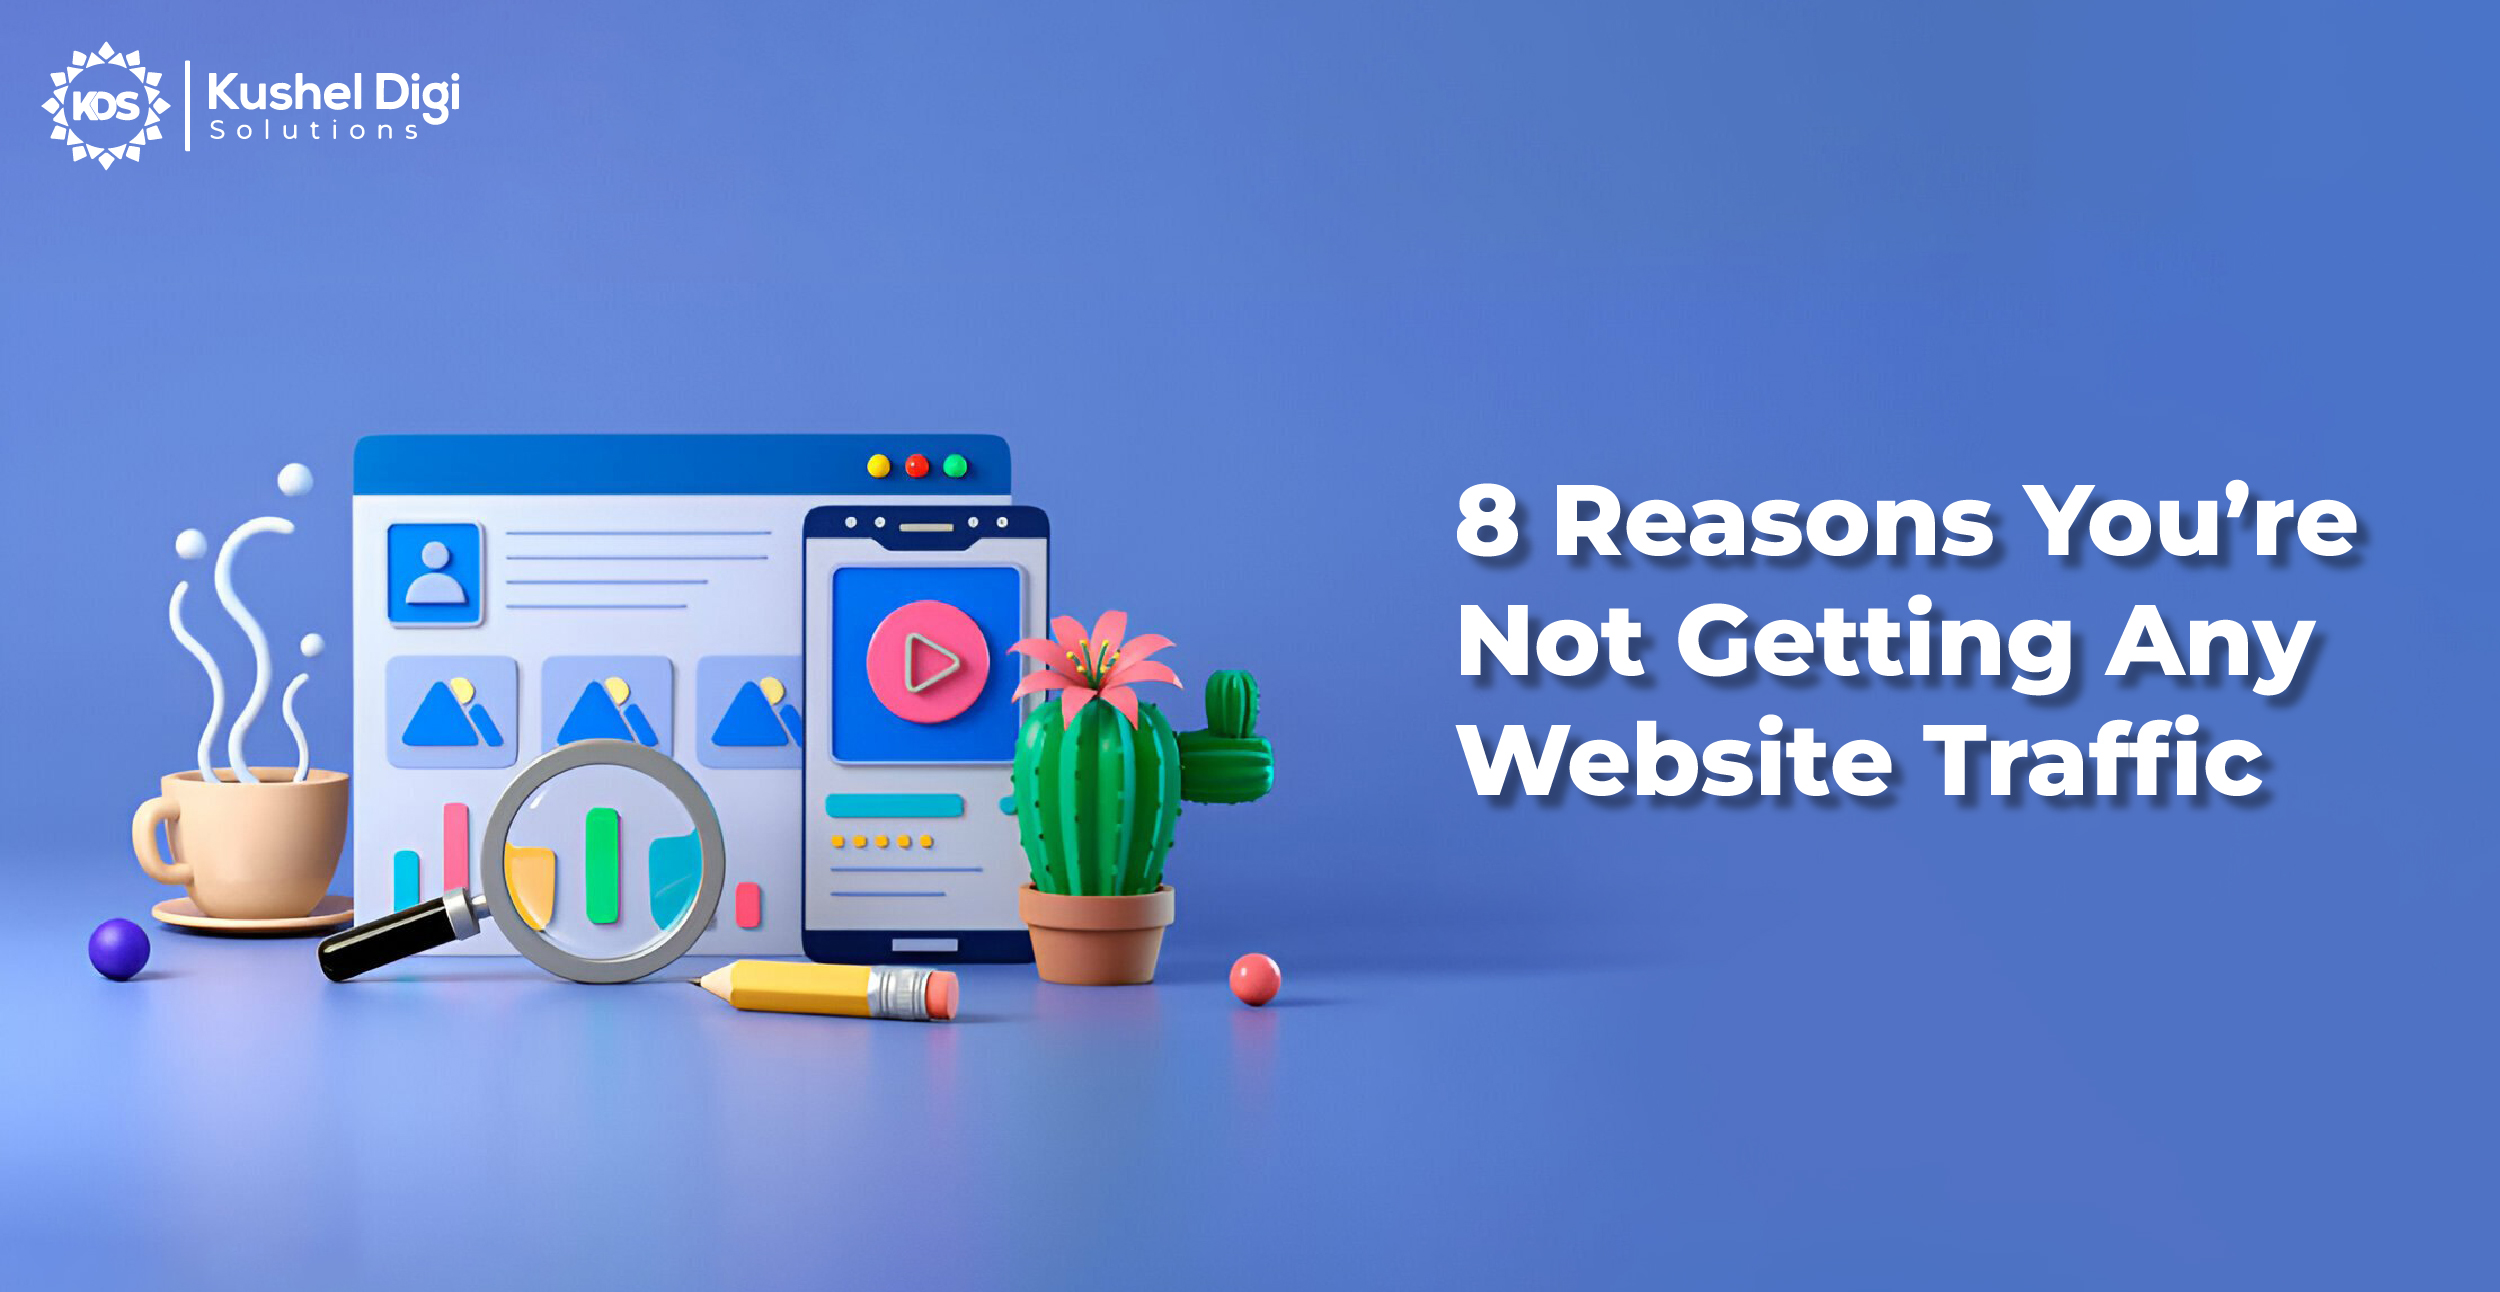 8 Reasons You’re Not Getting Any Website Traffic